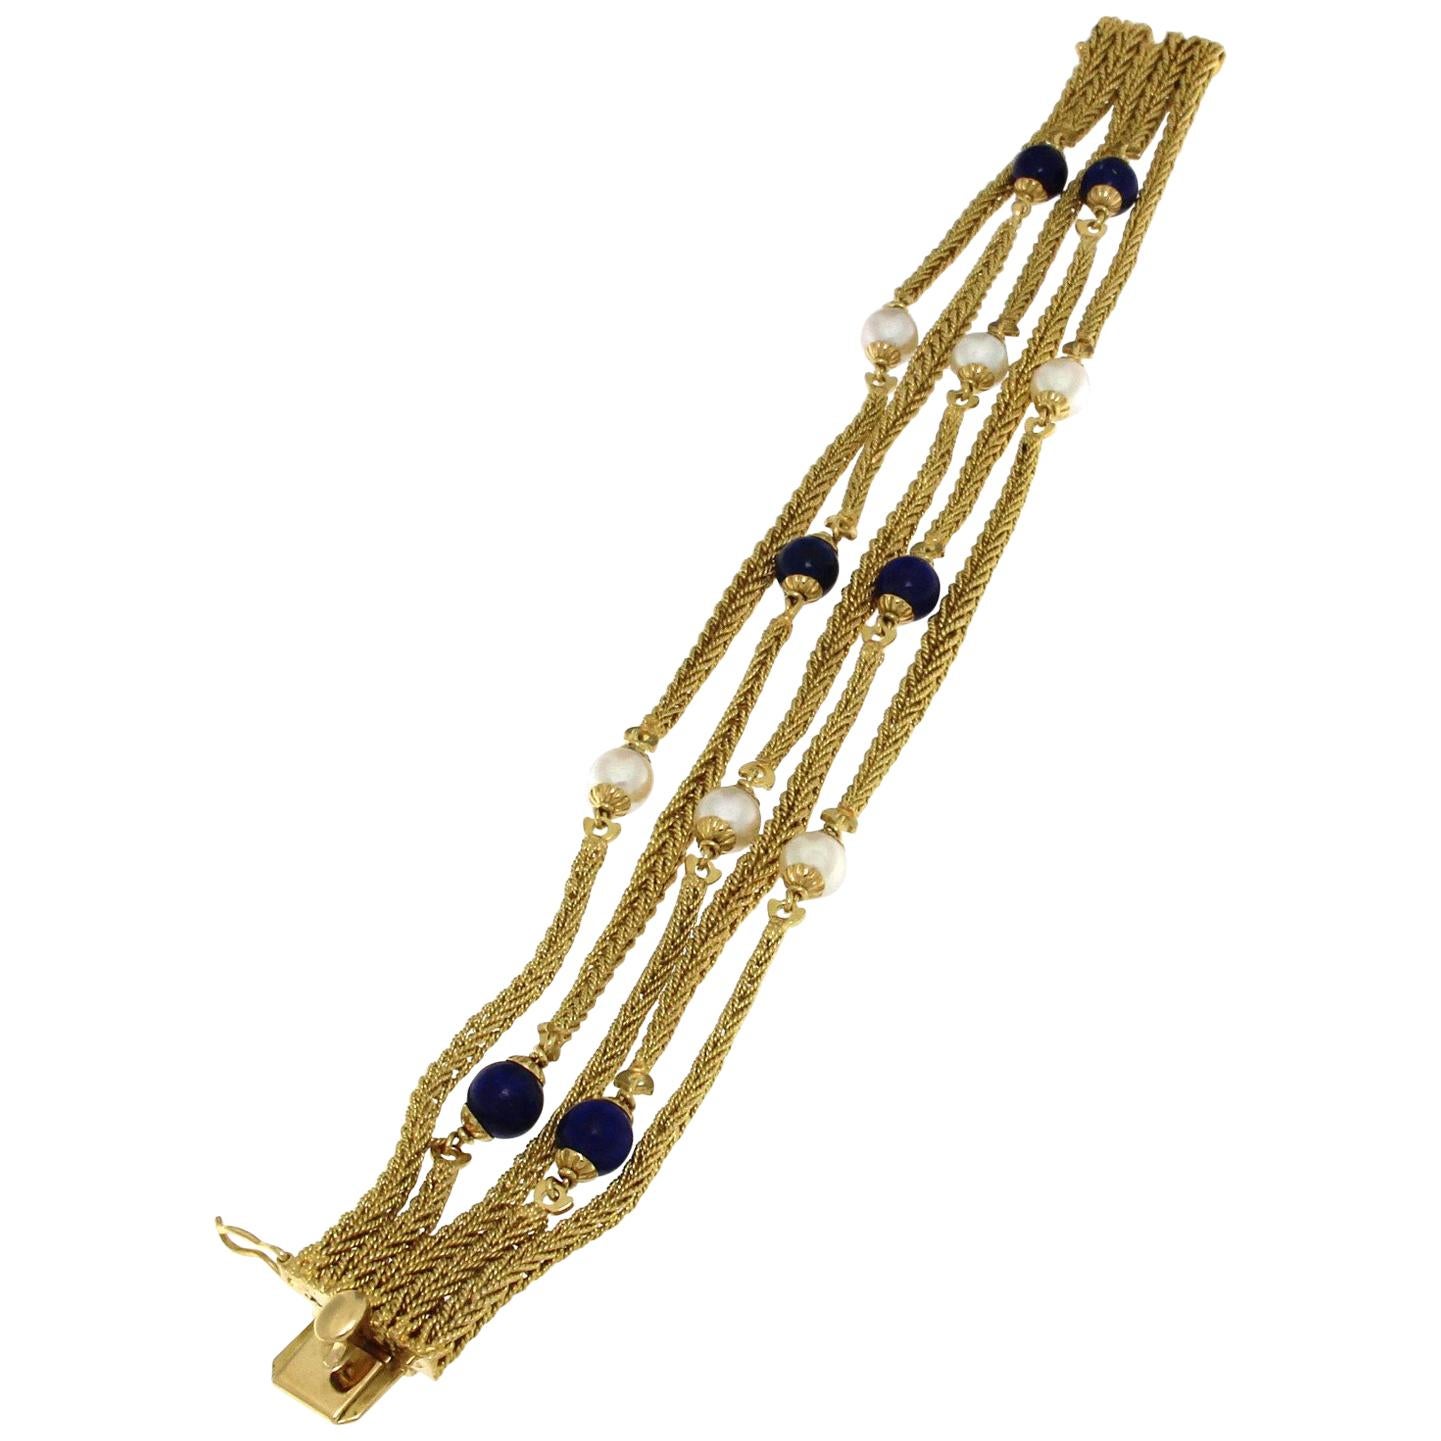 18 Karat Yellow Multichain Bracelet with Pearls and Lapis